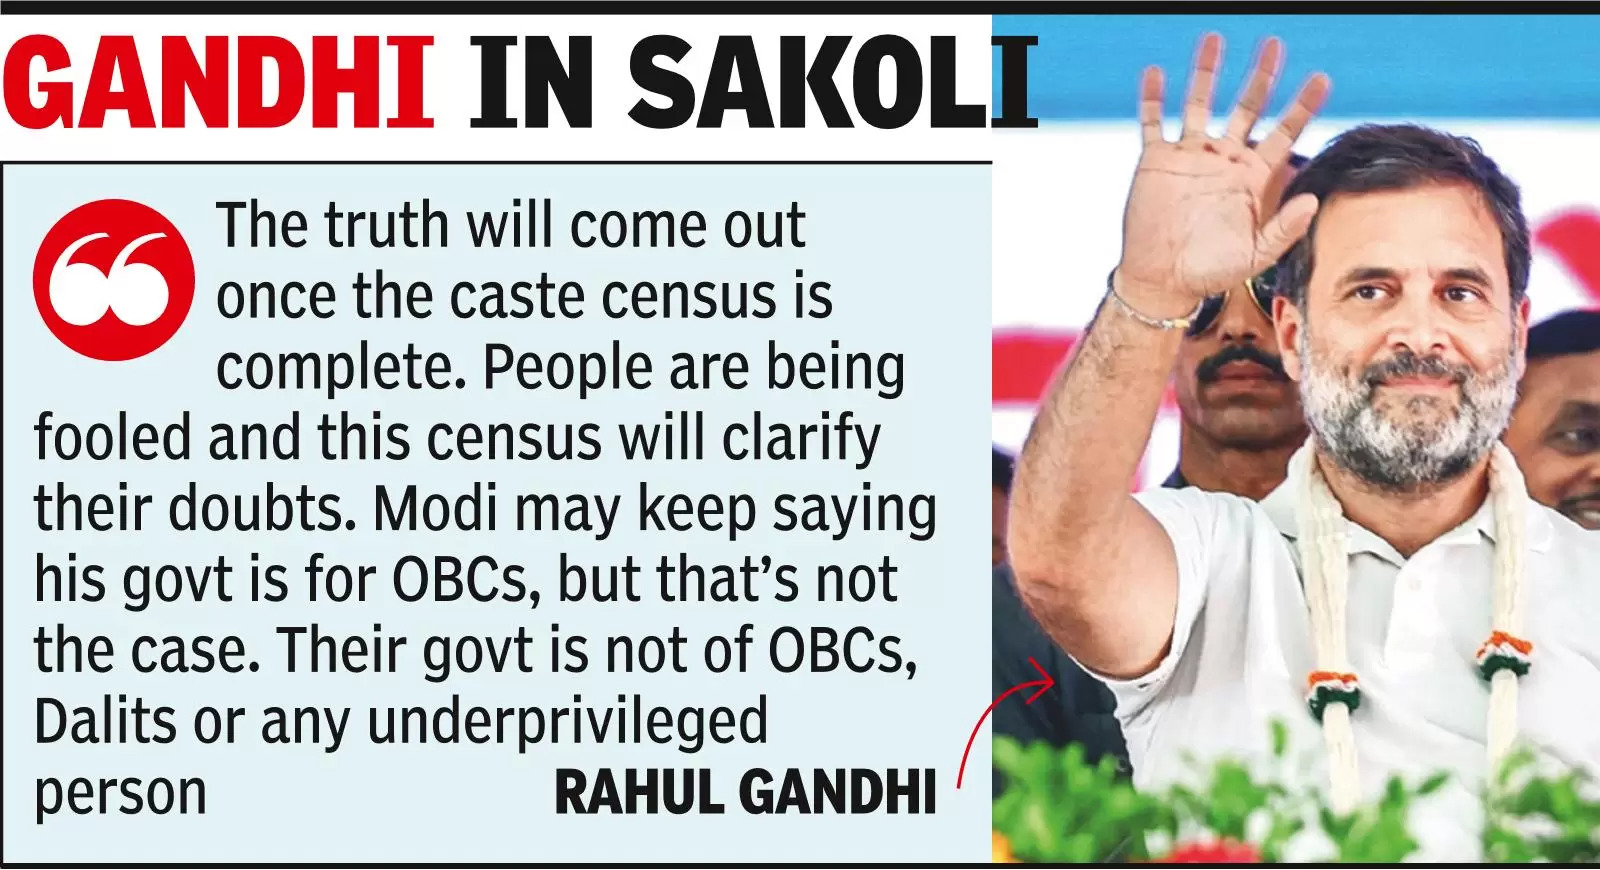 1st day in office, will order caste census & scrap Agniveer: Rahul